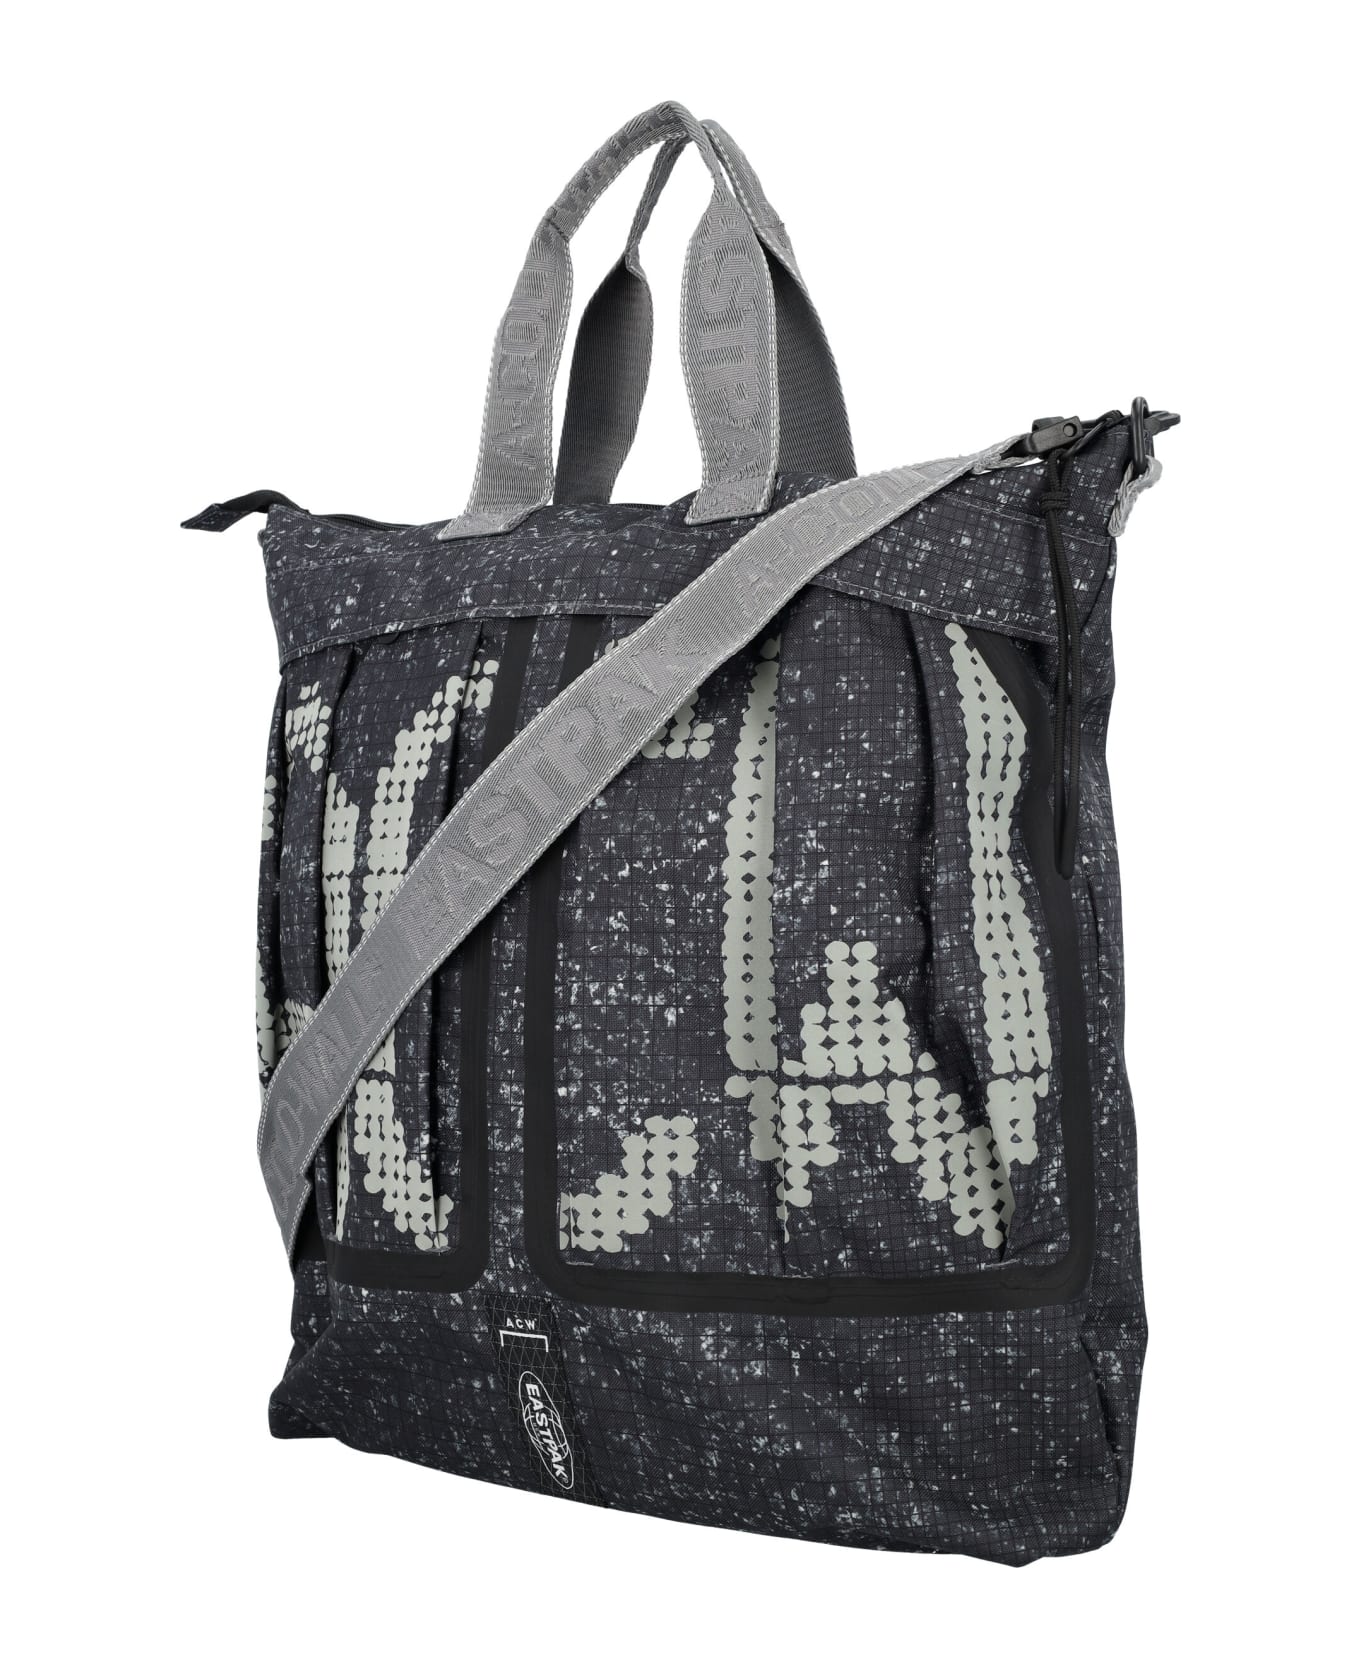 Eastpak A-cold-wall Tote - PEBBLE